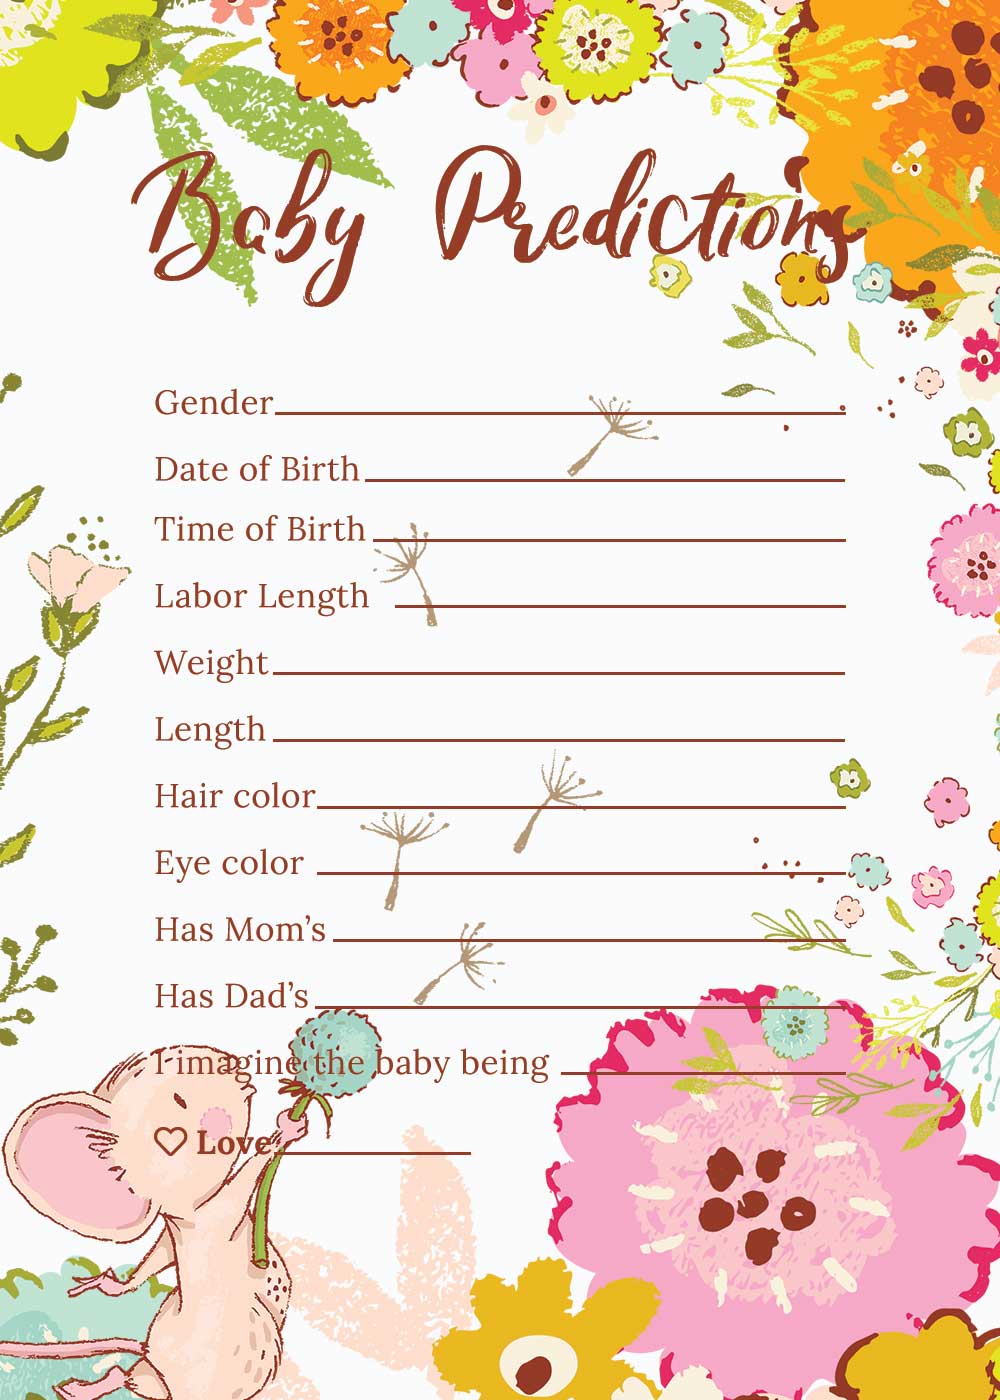 Baby Shower Baby prediction card - Spring Theme